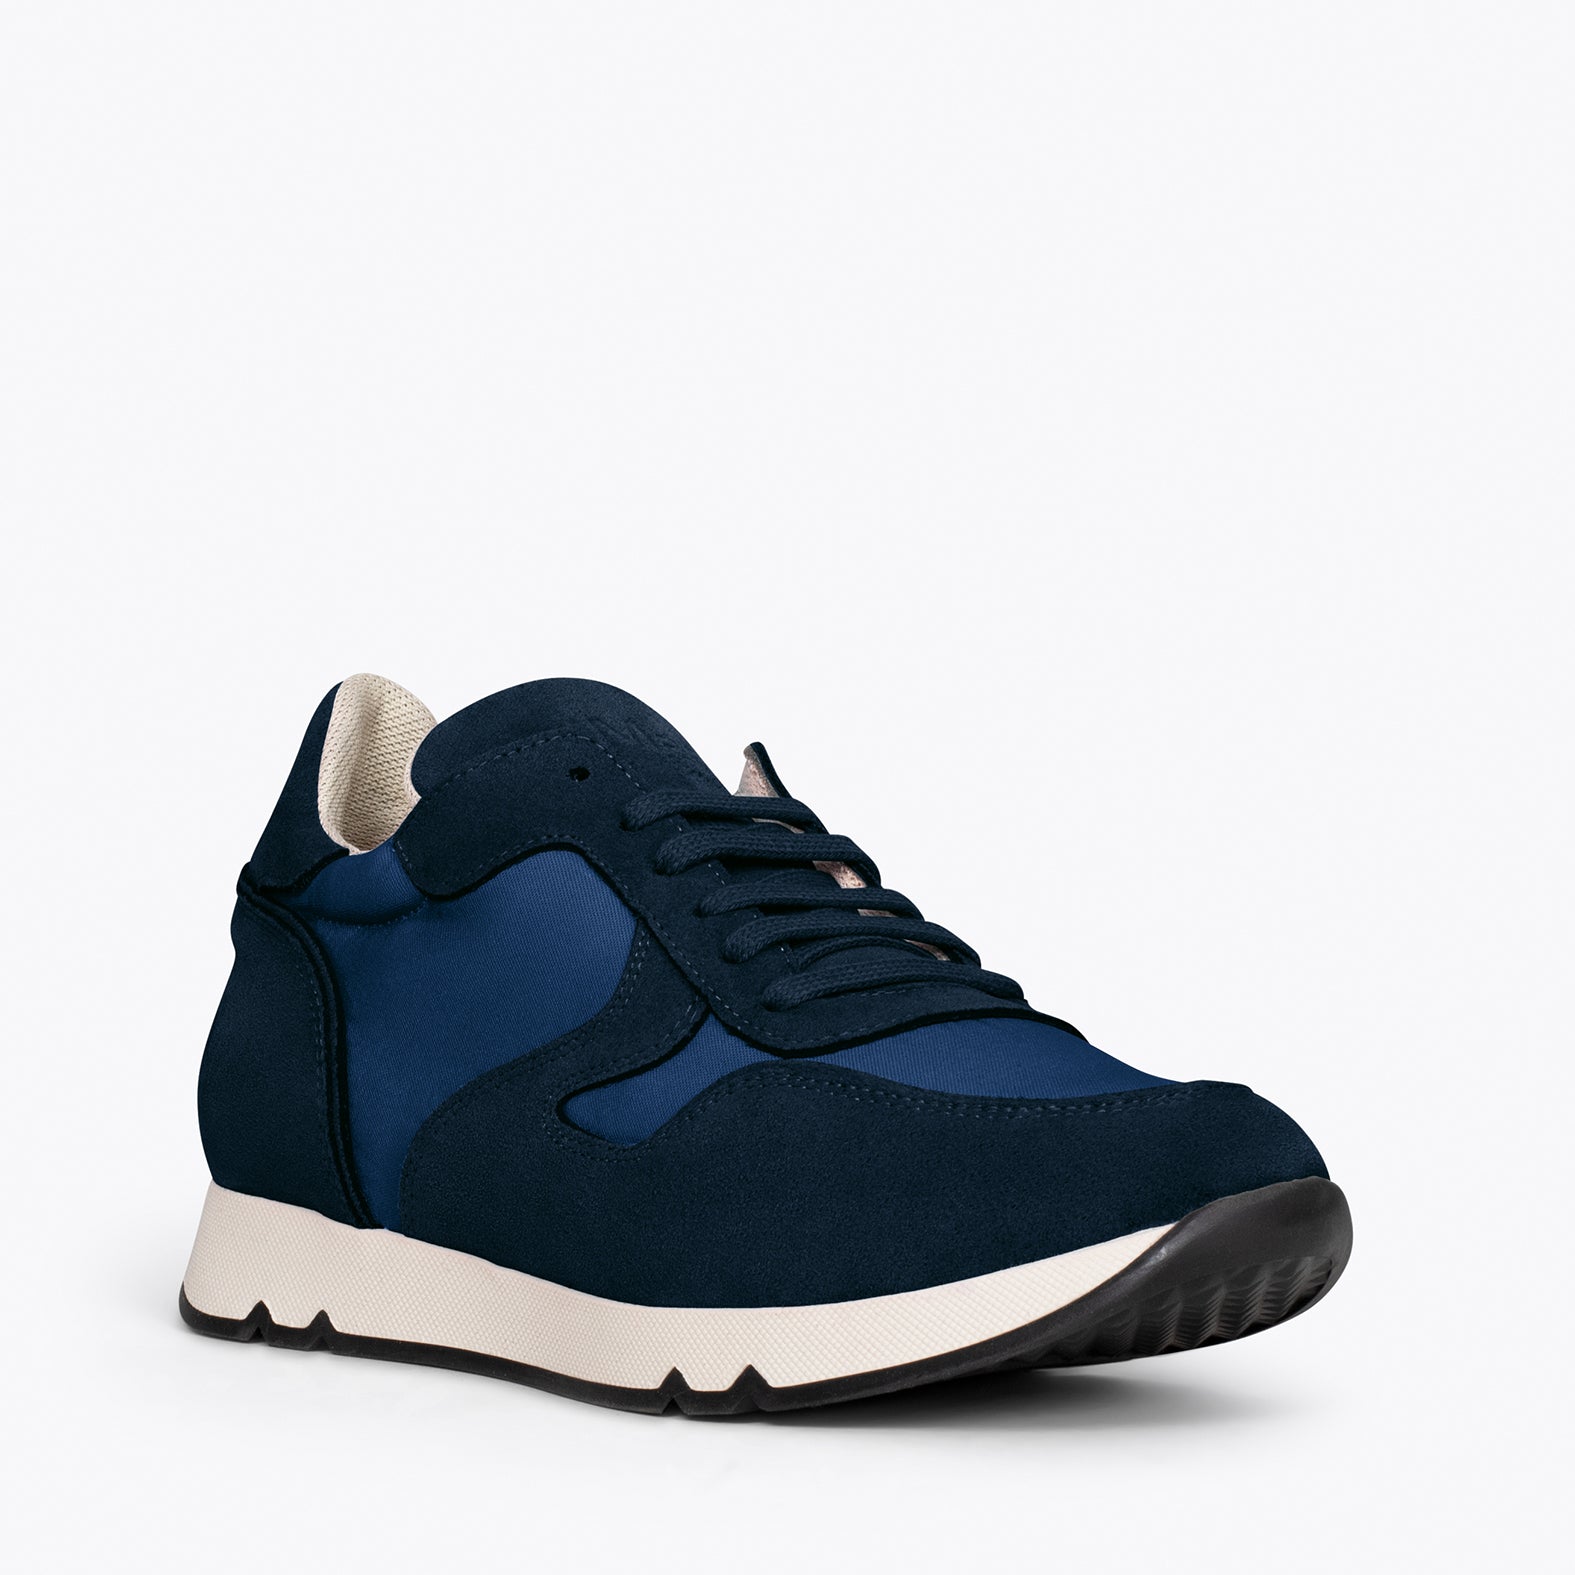 SPORTS – NAVY sneakers for women